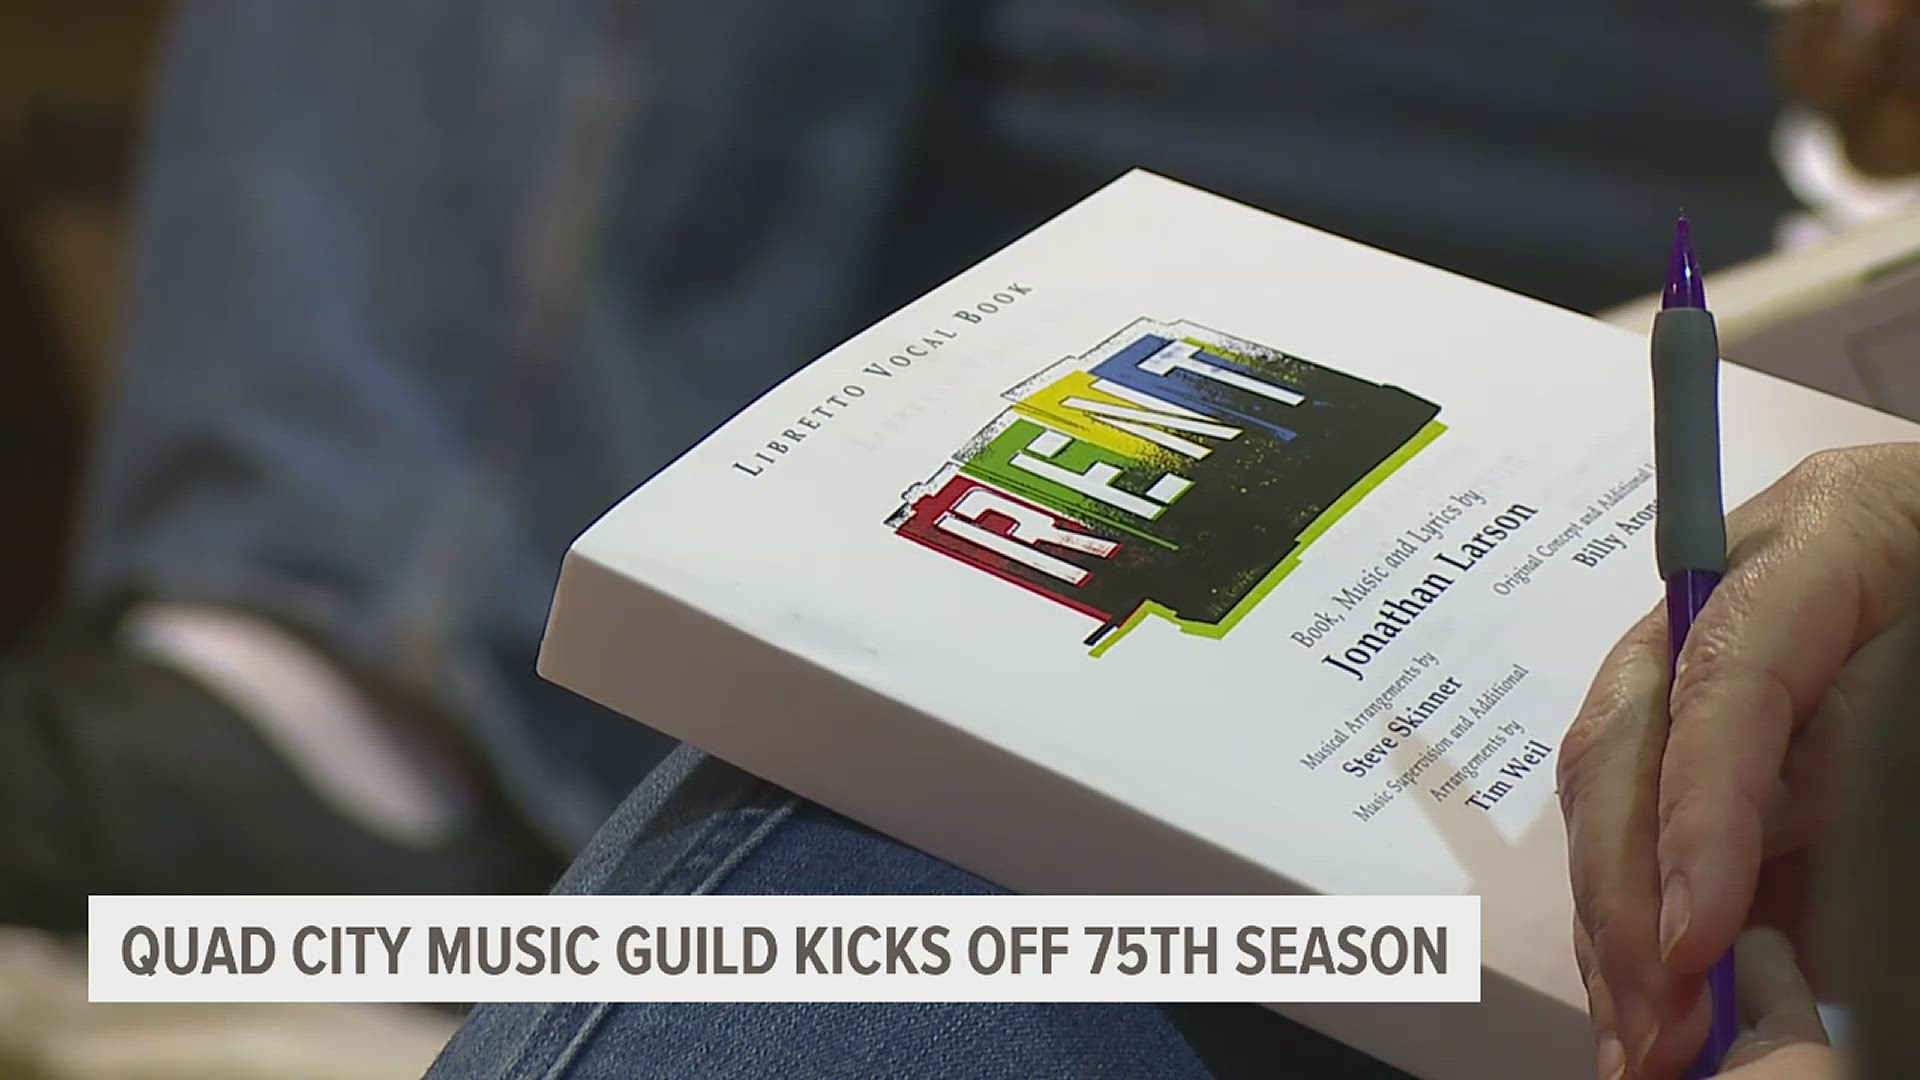 News 8's Shelby Kluver followed the Music Guild through seven weeks of preparations ahead of its performance of "Rent."